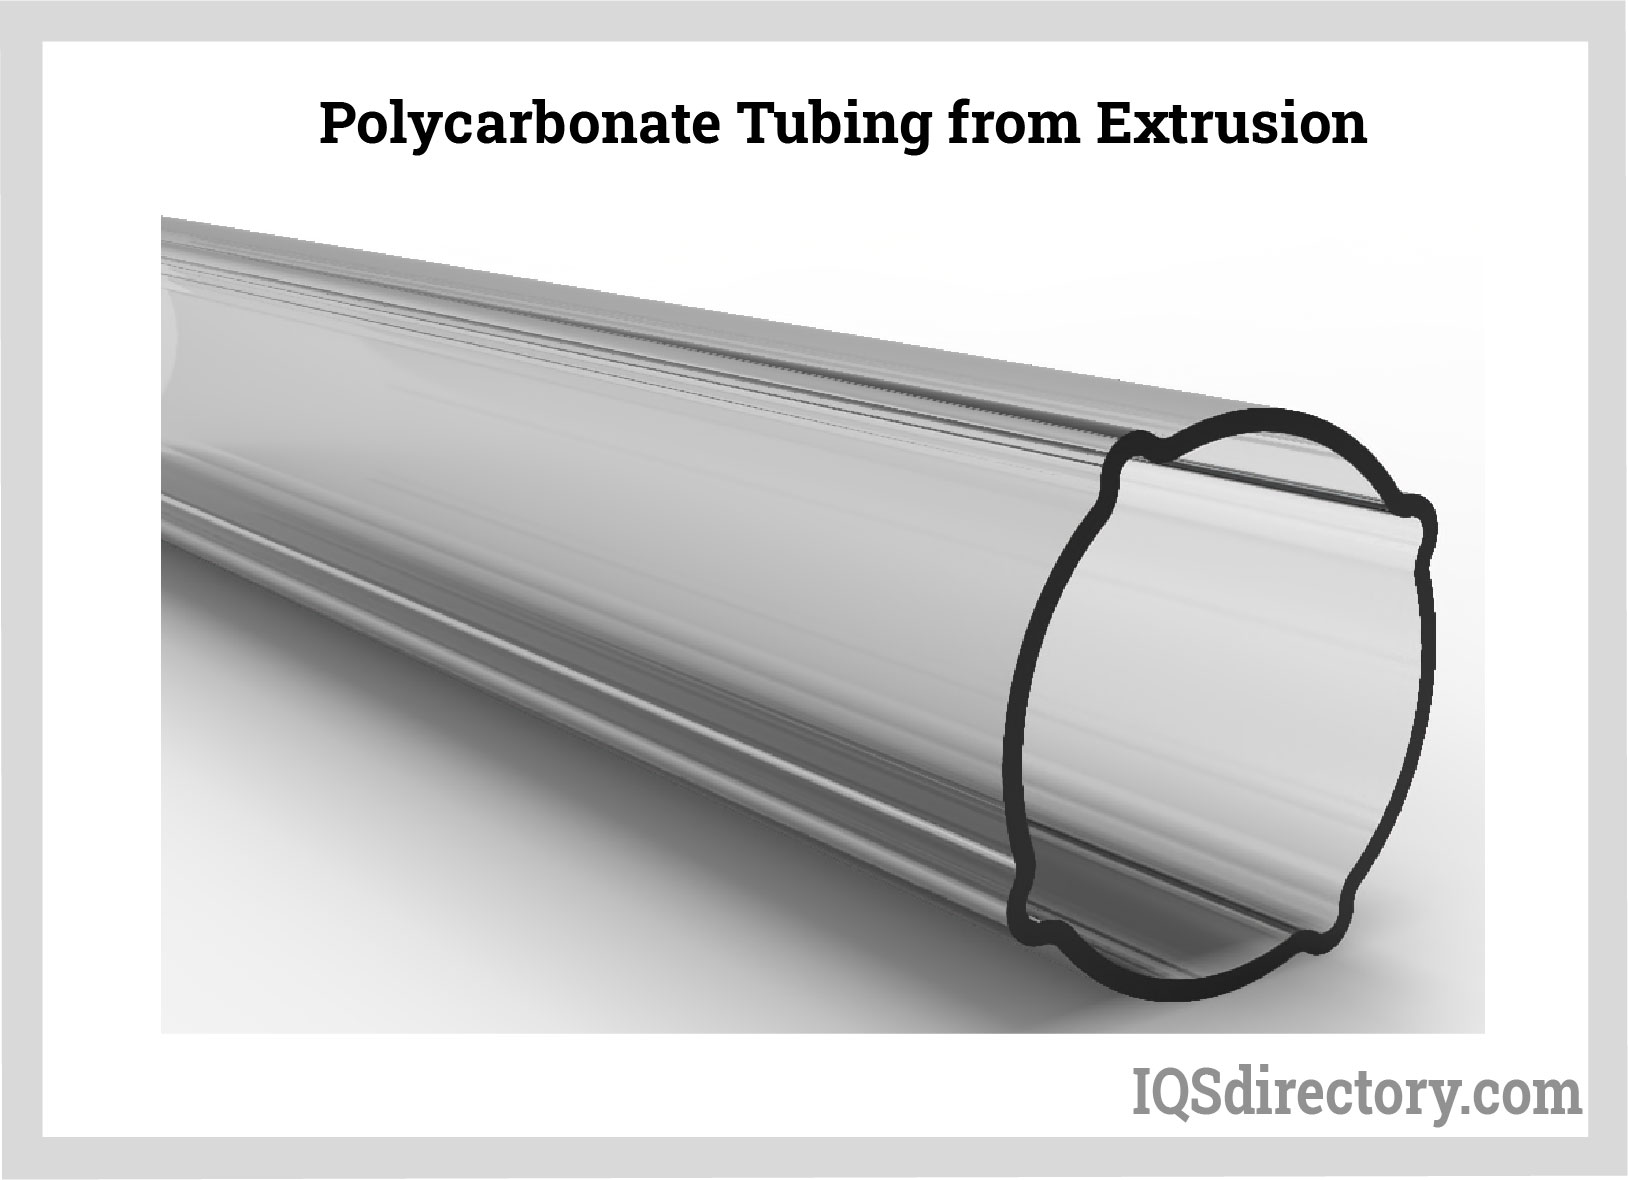 Polycarbonate Tubing from Extrusion